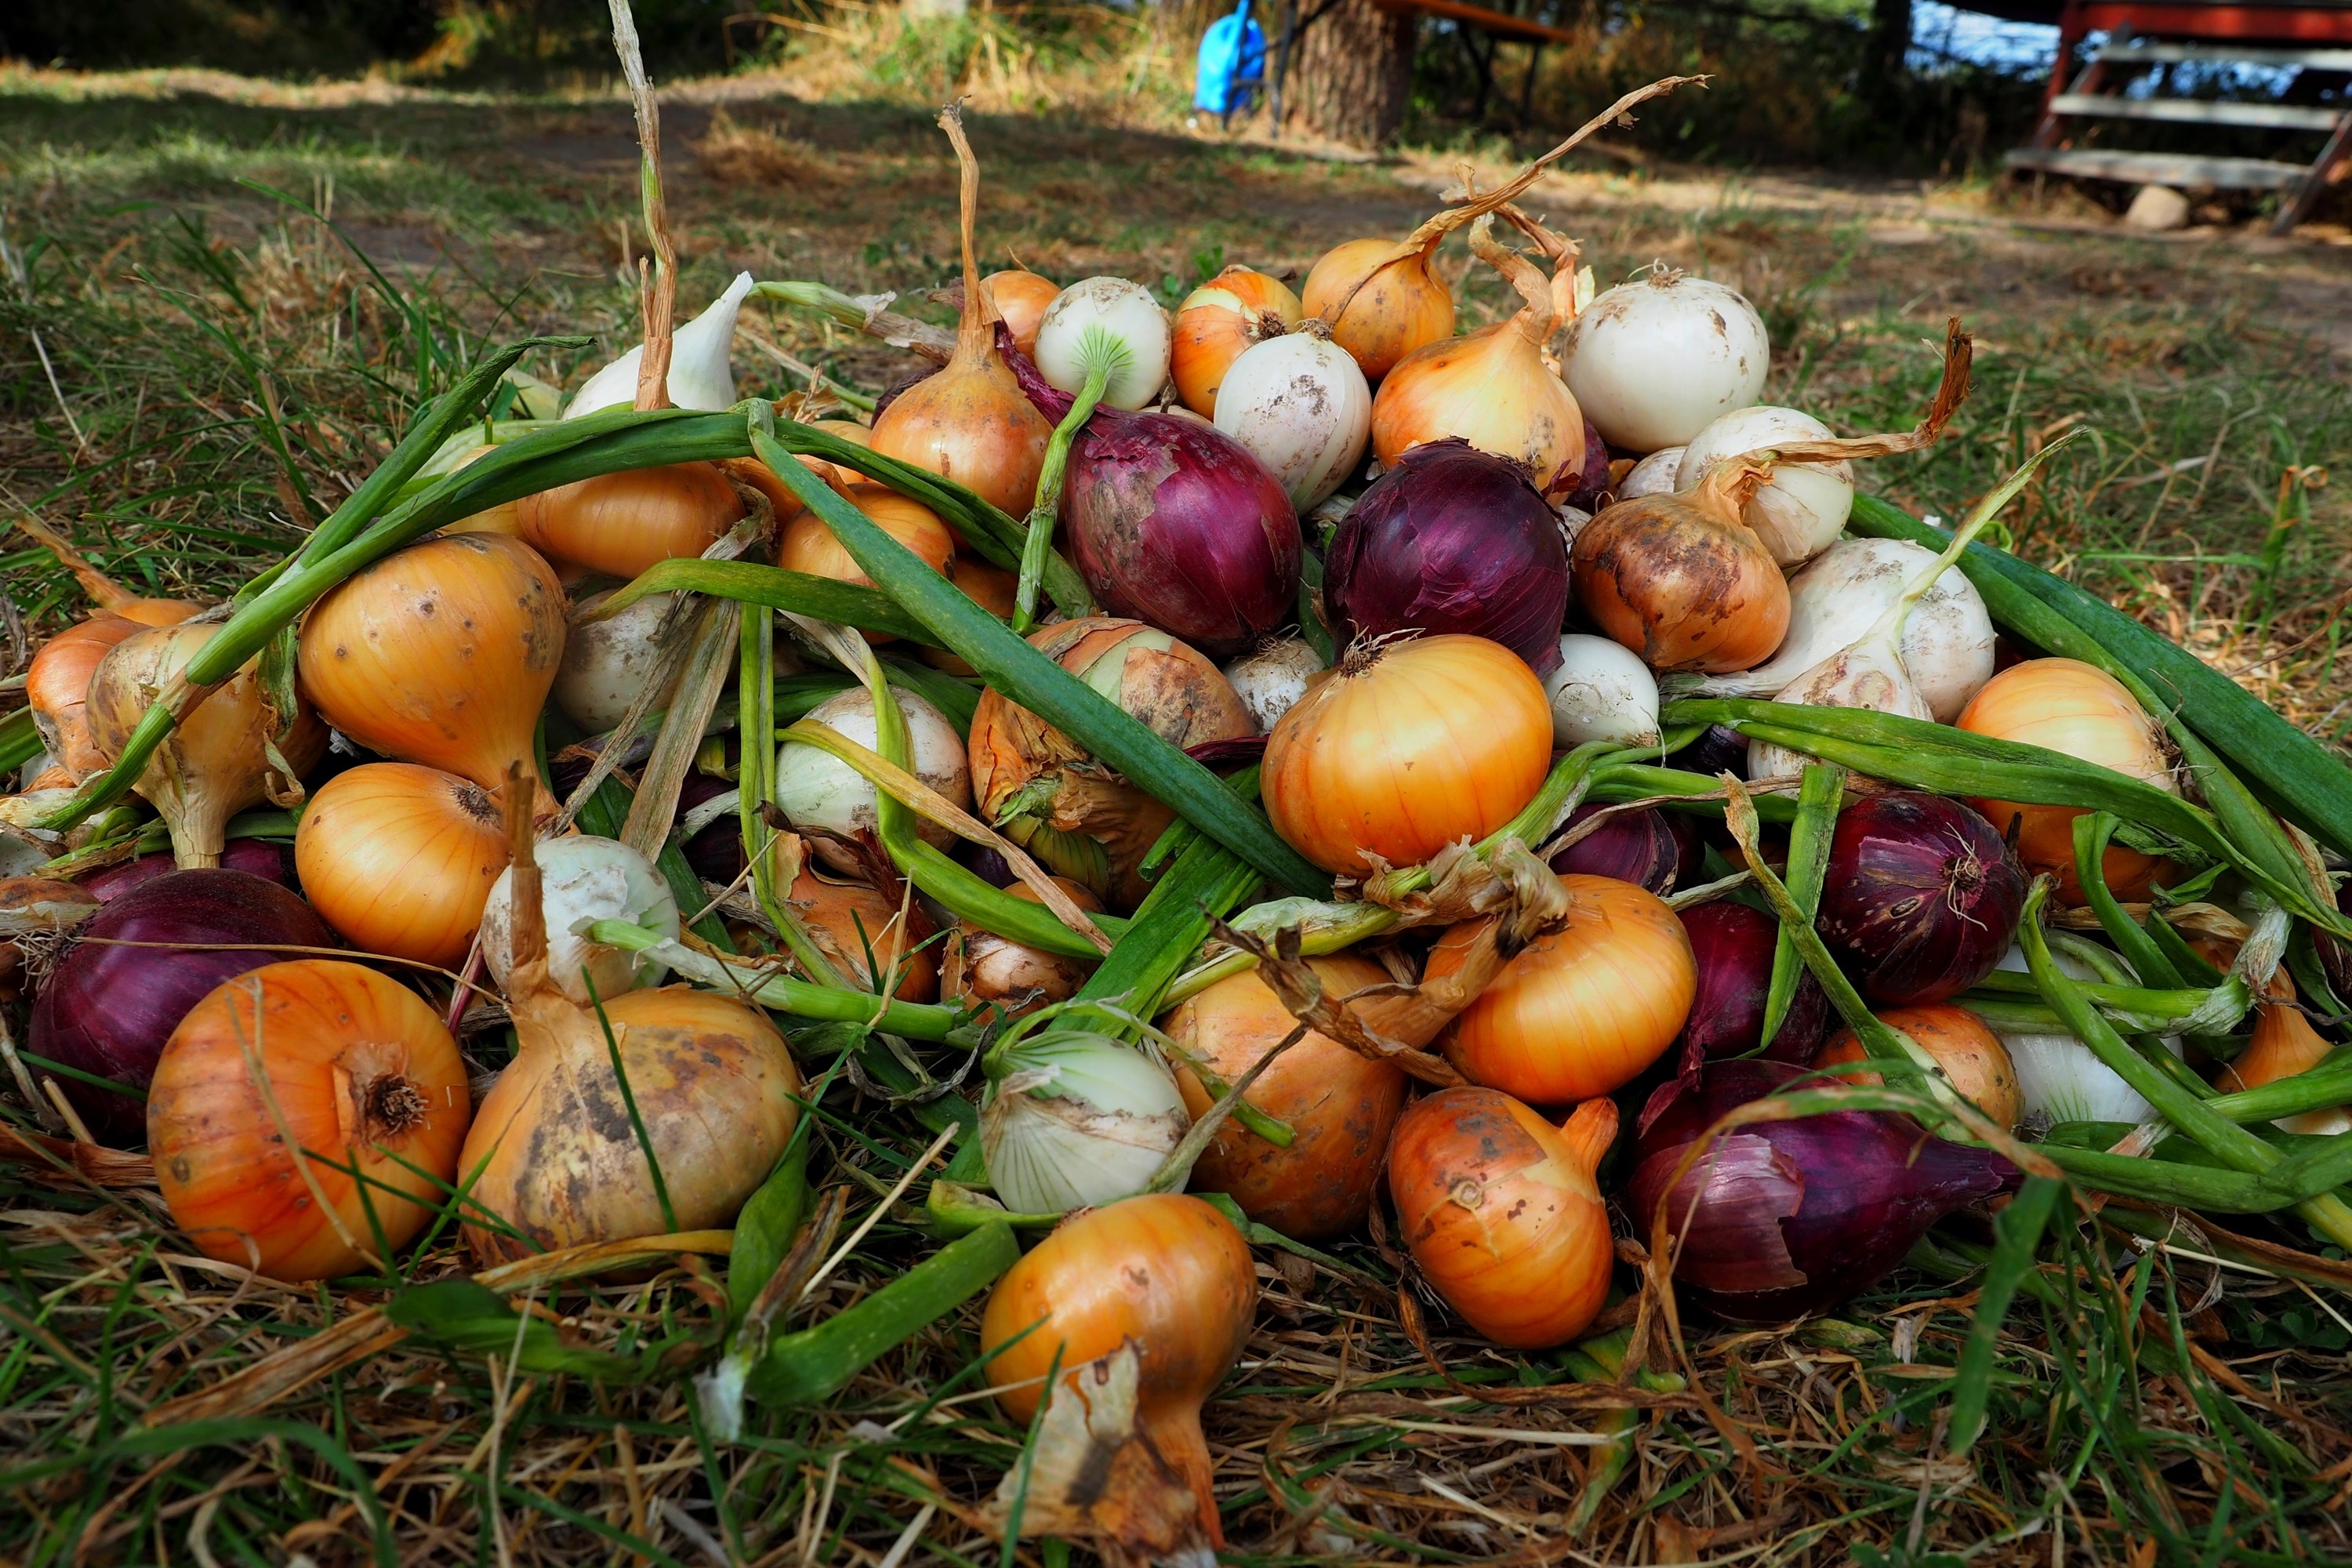 A pile of freshly harvested onions of various colors lies on the ground